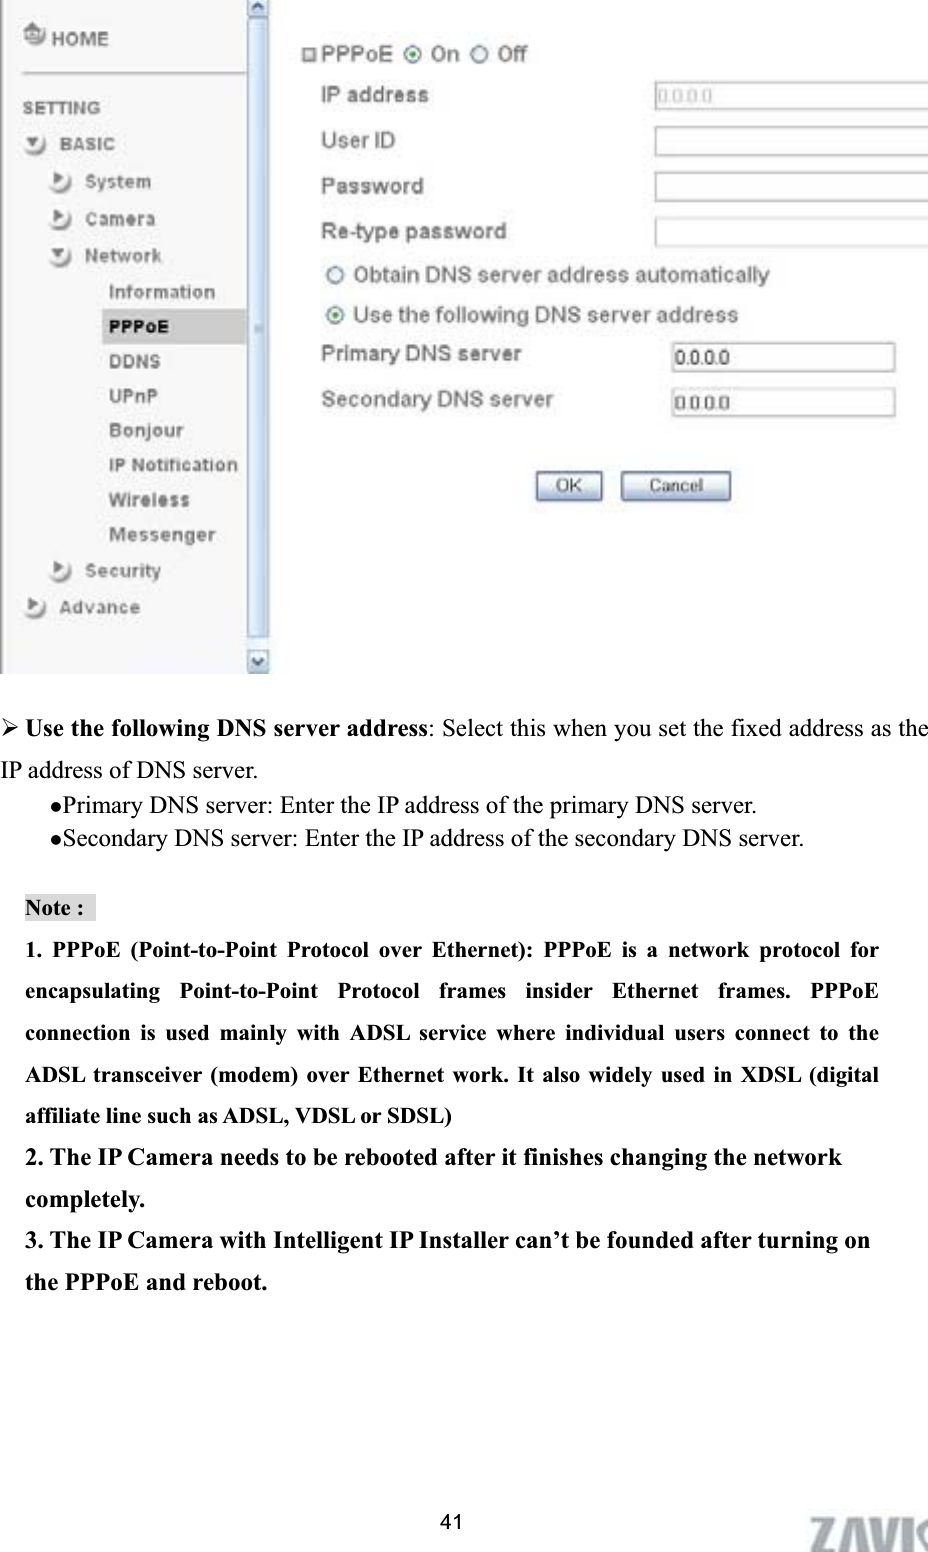      ¾Use the following DNS server address: Select this when you set the fixed address as the IP address of DNS server. zPrimary DNS server: Enter the IP address of the primary DNS server. zSecondary DNS server: Enter the IP address of the secondary DNS server. Note :   1. PPPoE (Point-to-Point Protocol over Ethernet): PPPoE is a network protocol for encapsulating Point-to-Point Protocol frames insider Ethernet frames. PPPoE connection is used mainly with ADSL service where individual users connect to the ADSL transceiver (modem) over Ethernet work. It also widely used in XDSL (digital affiliate line such as ADSL, VDSL or SDSL) 2. The IP Camera needs to be rebooted after it finishes changing the network completely. 3. The IP Camera with Intelligent IP Installer can’t be founded after turning on the PPPoE and reboot. 41